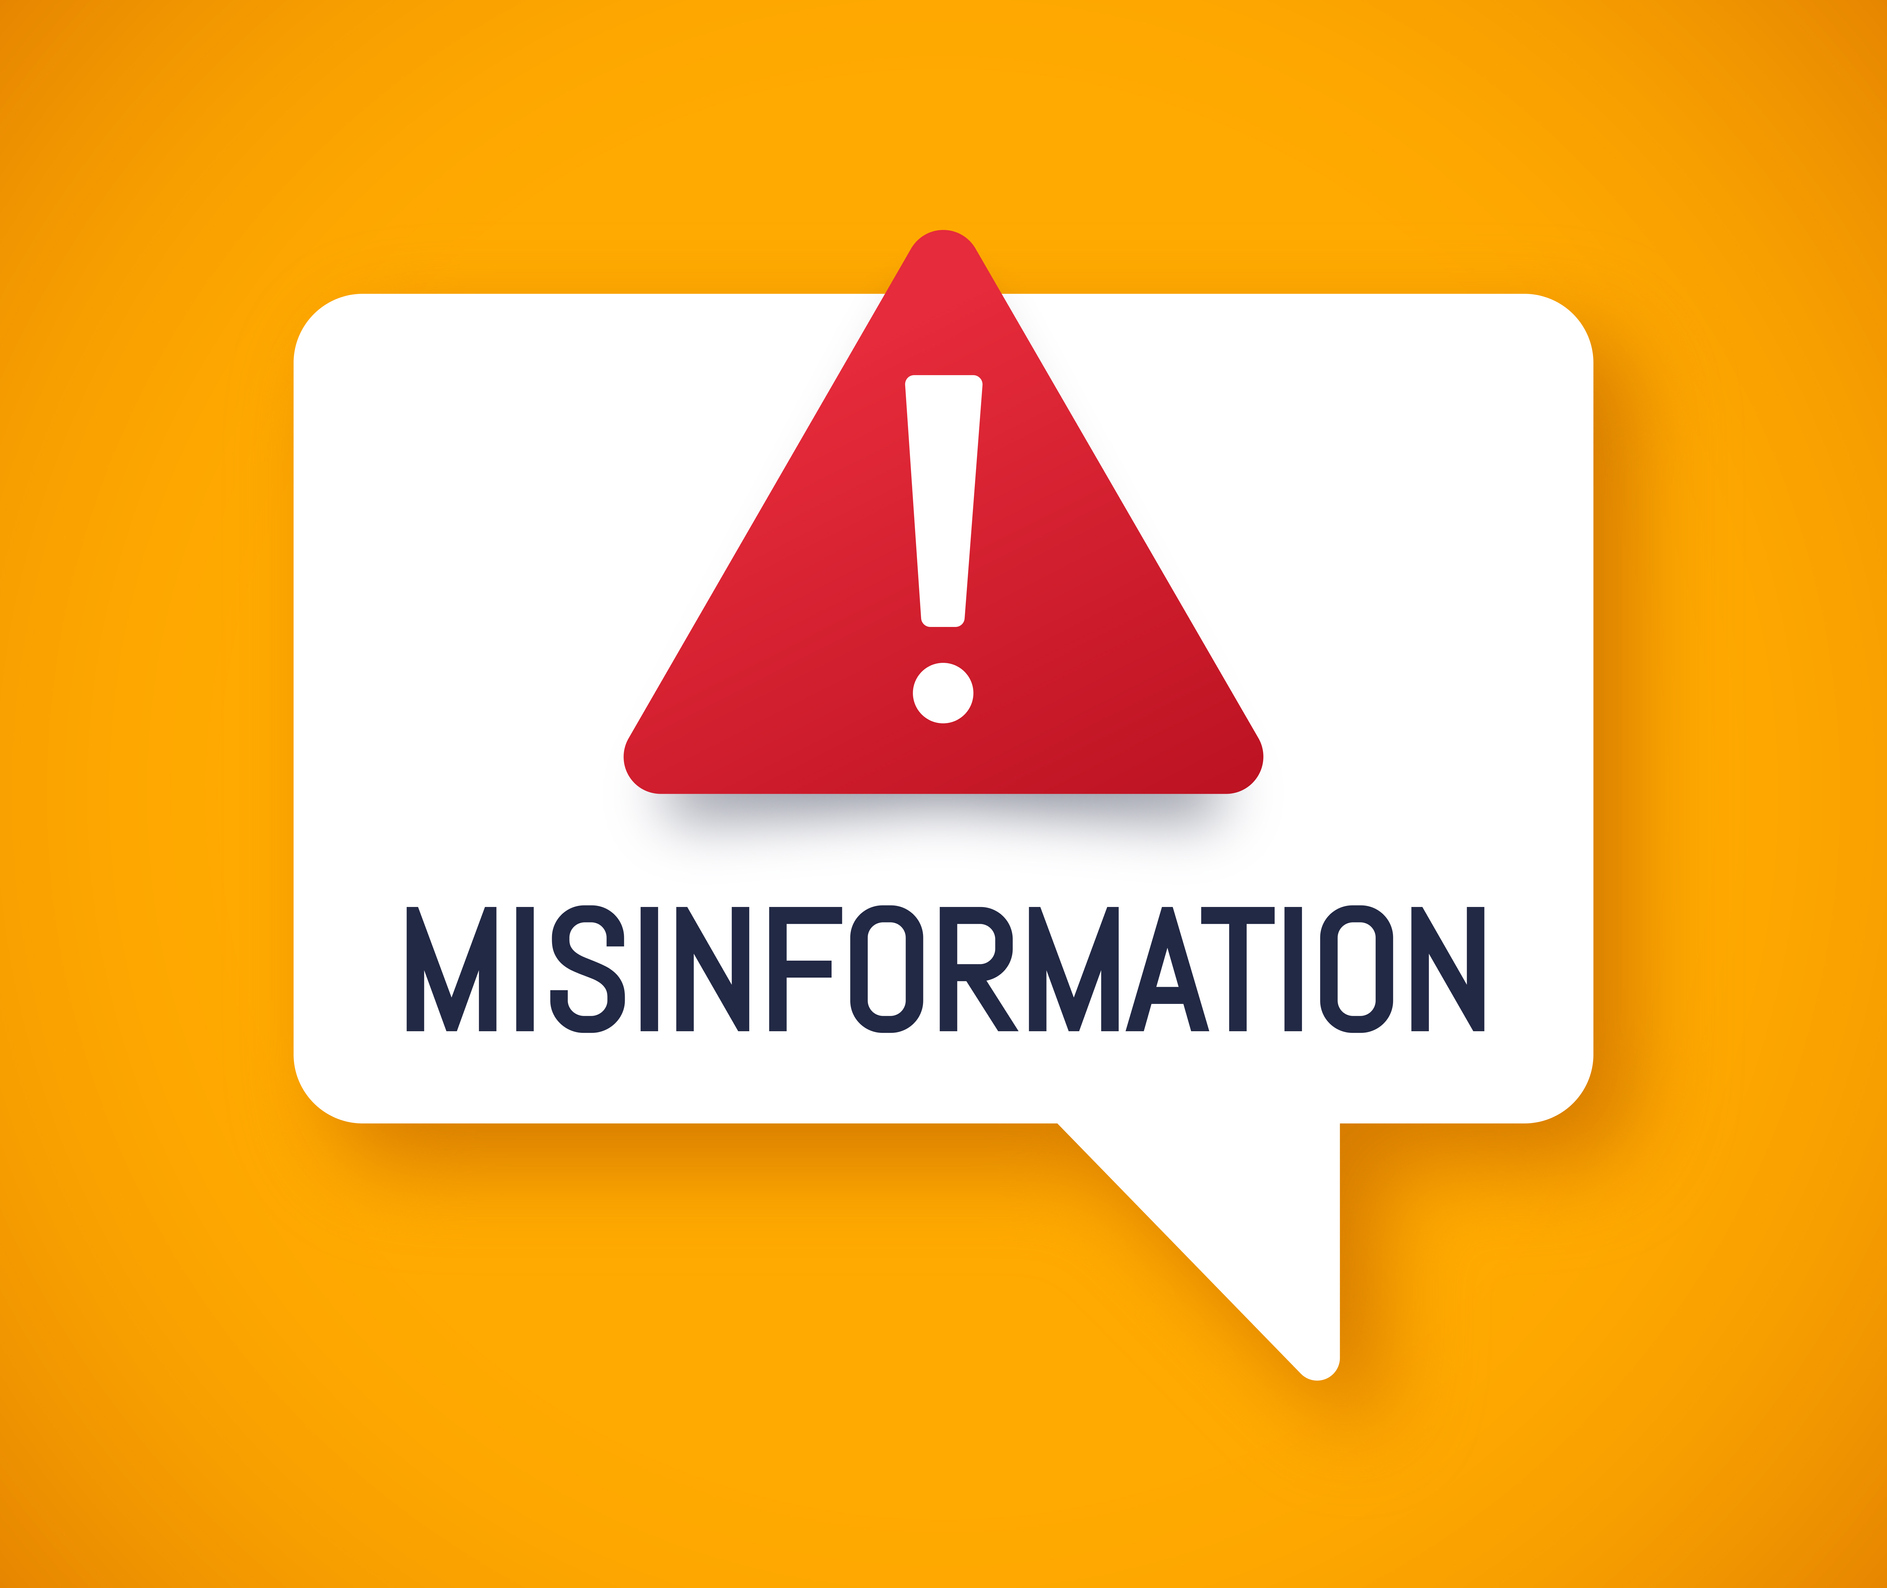 Why & How Physicians Must Combat Misinformation